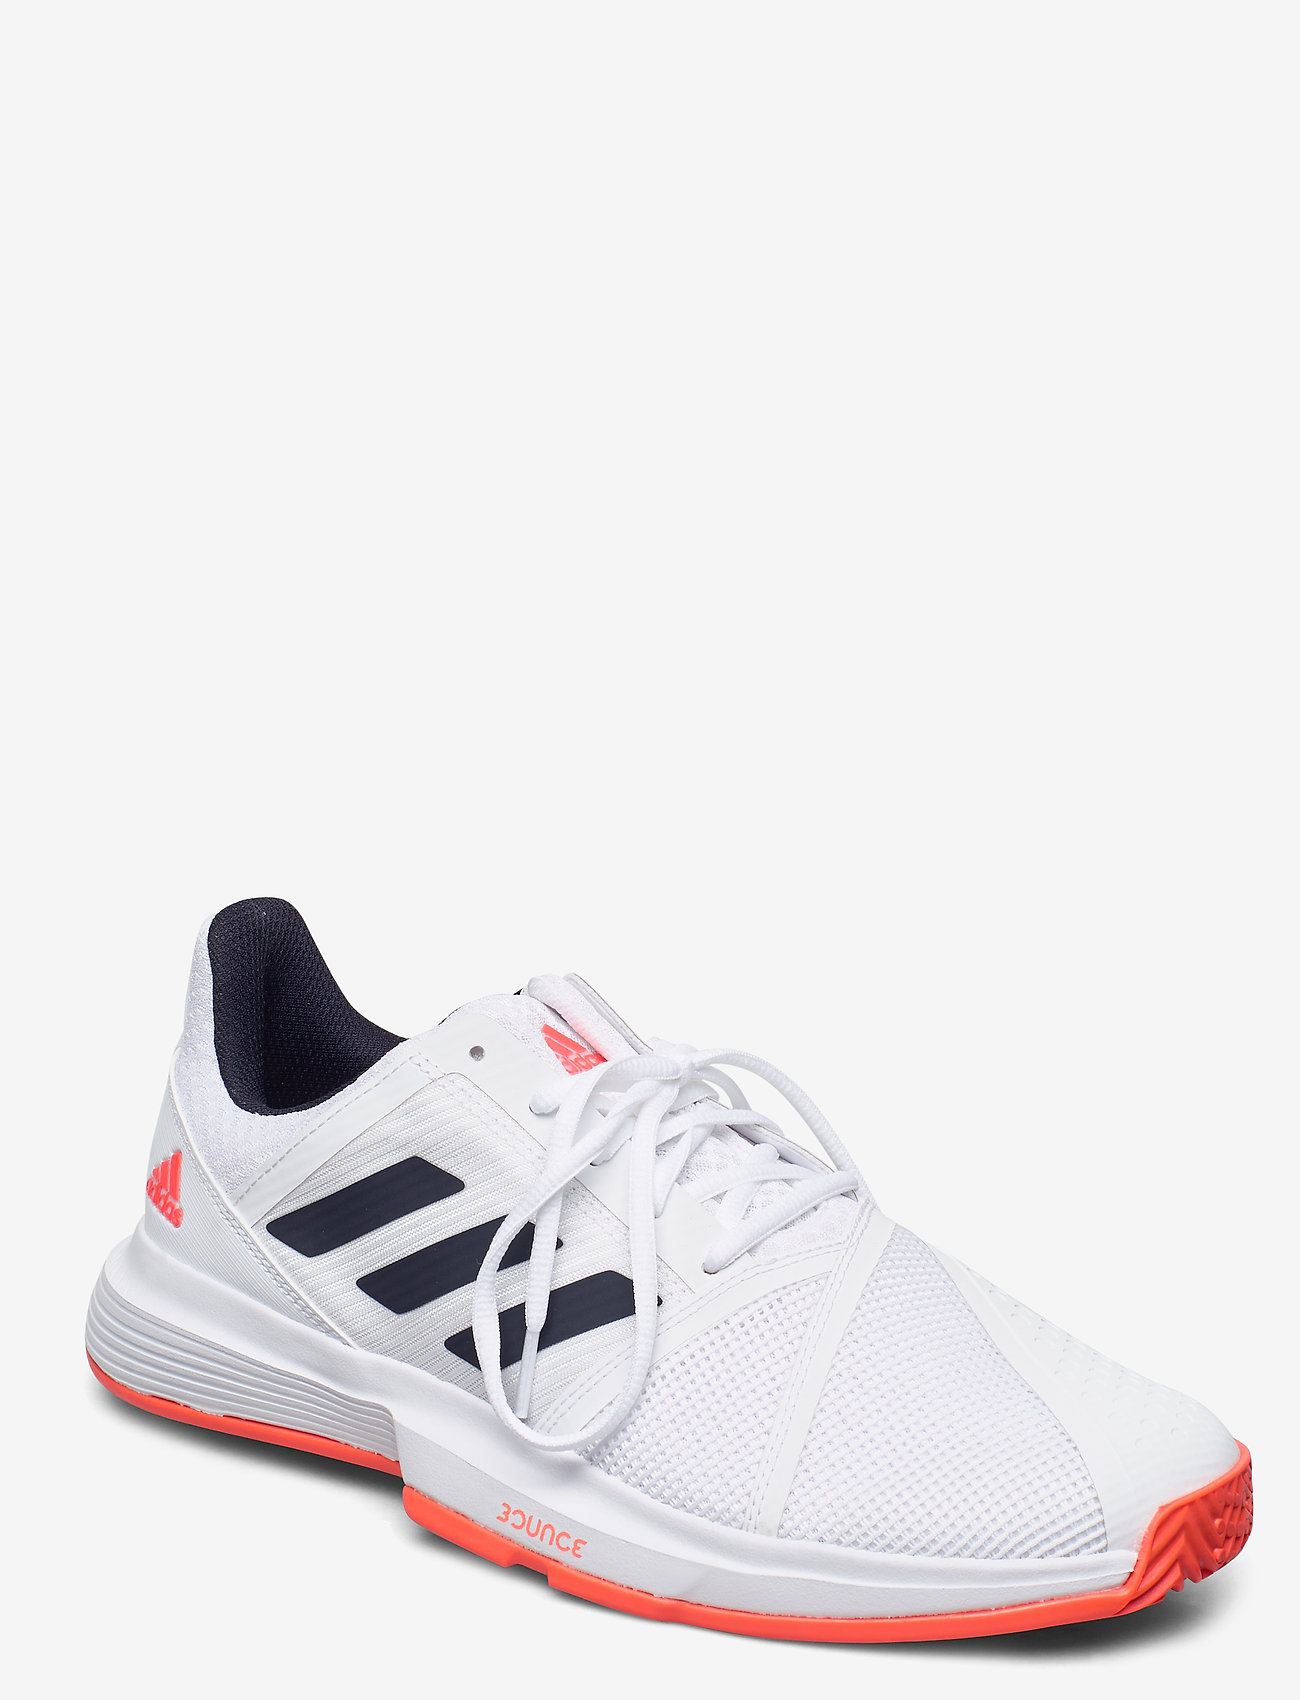 adidas shoes 90 discount